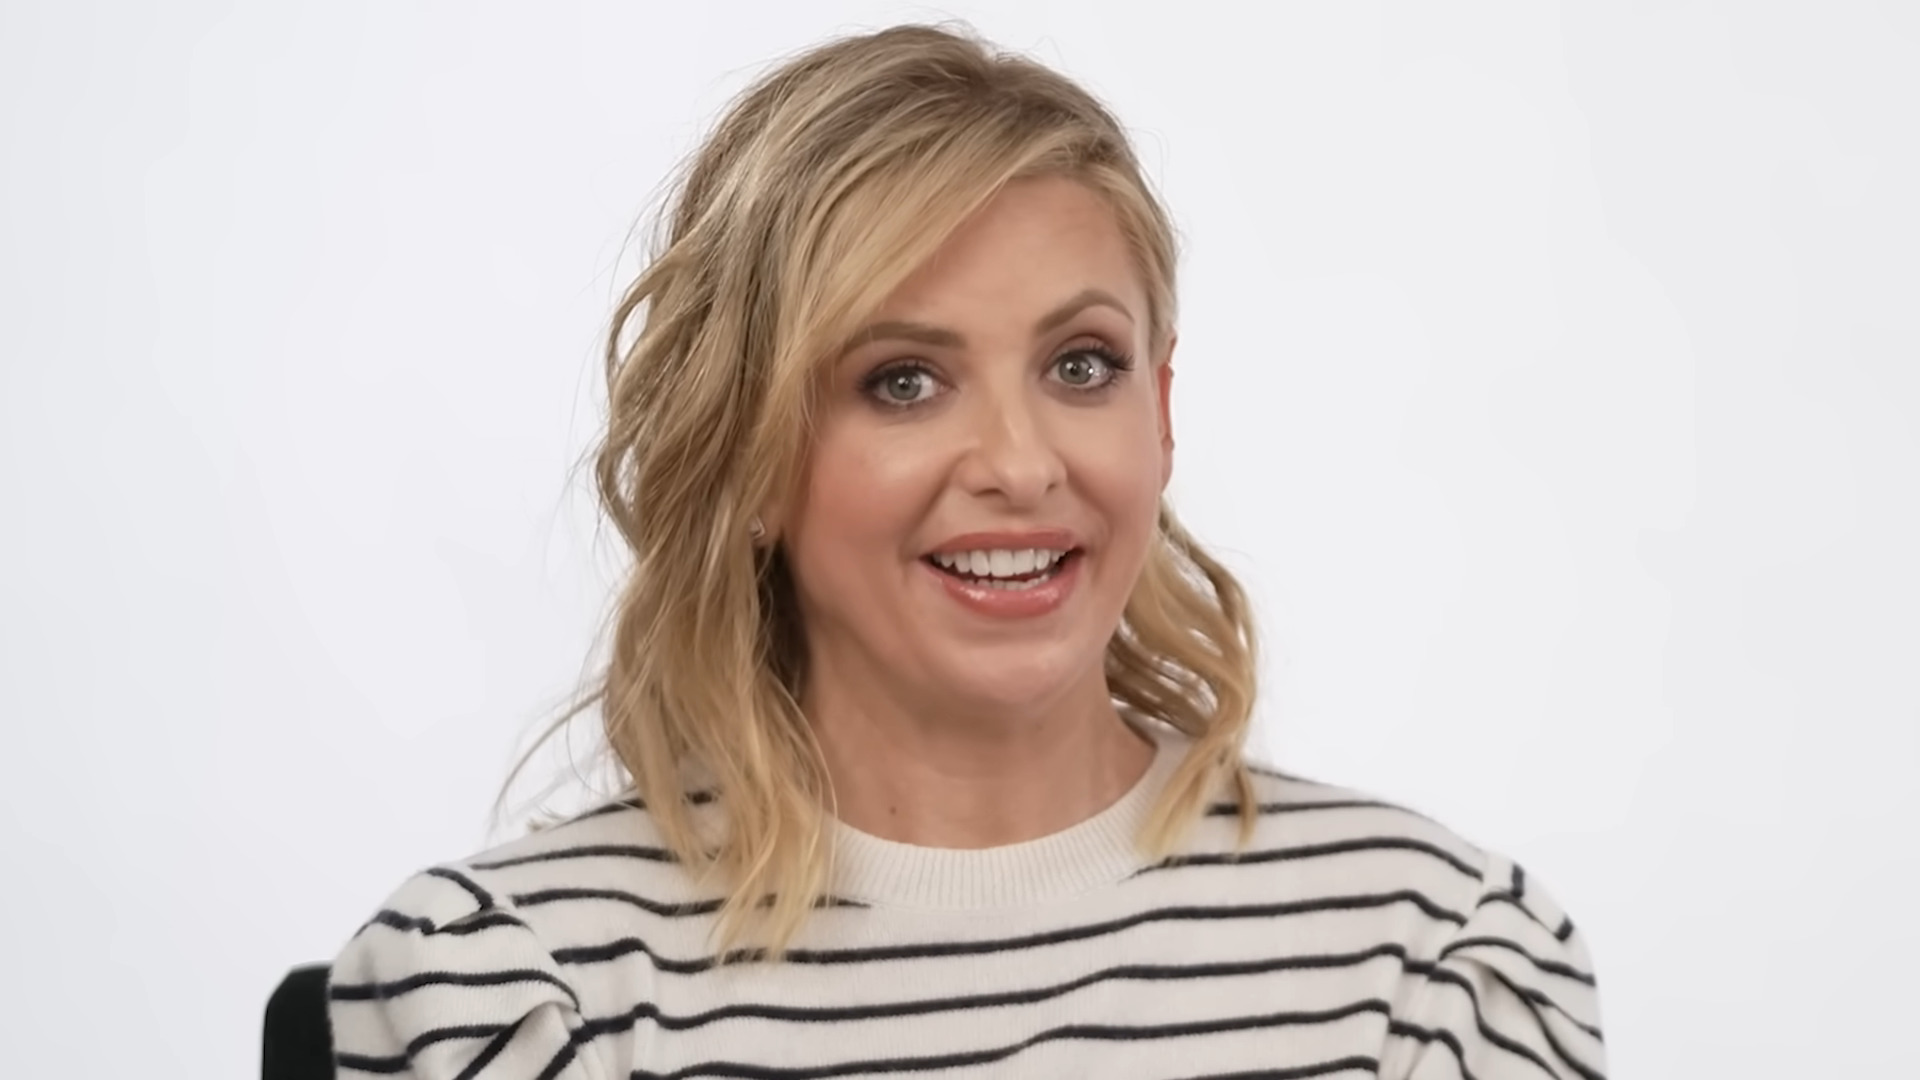 Sarah Michelle Gellar responds to fan tweets during an interview with IGV Presents